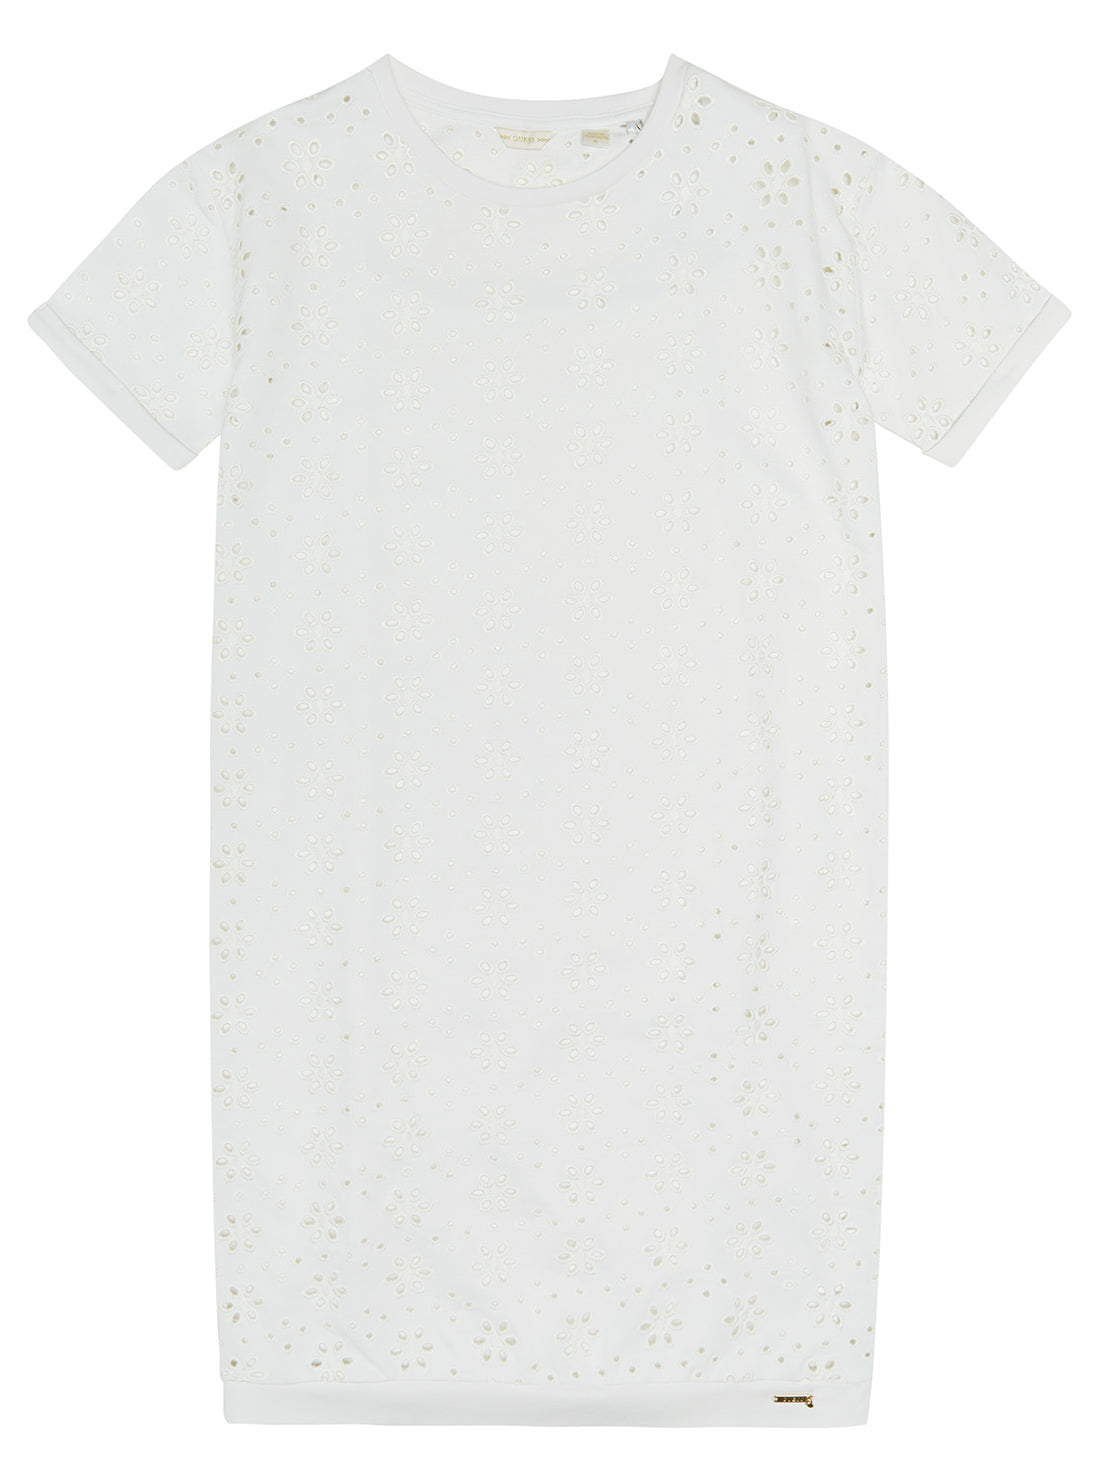 White Sangallo Terry Dress (7-16) | GUESS Kids | Front view